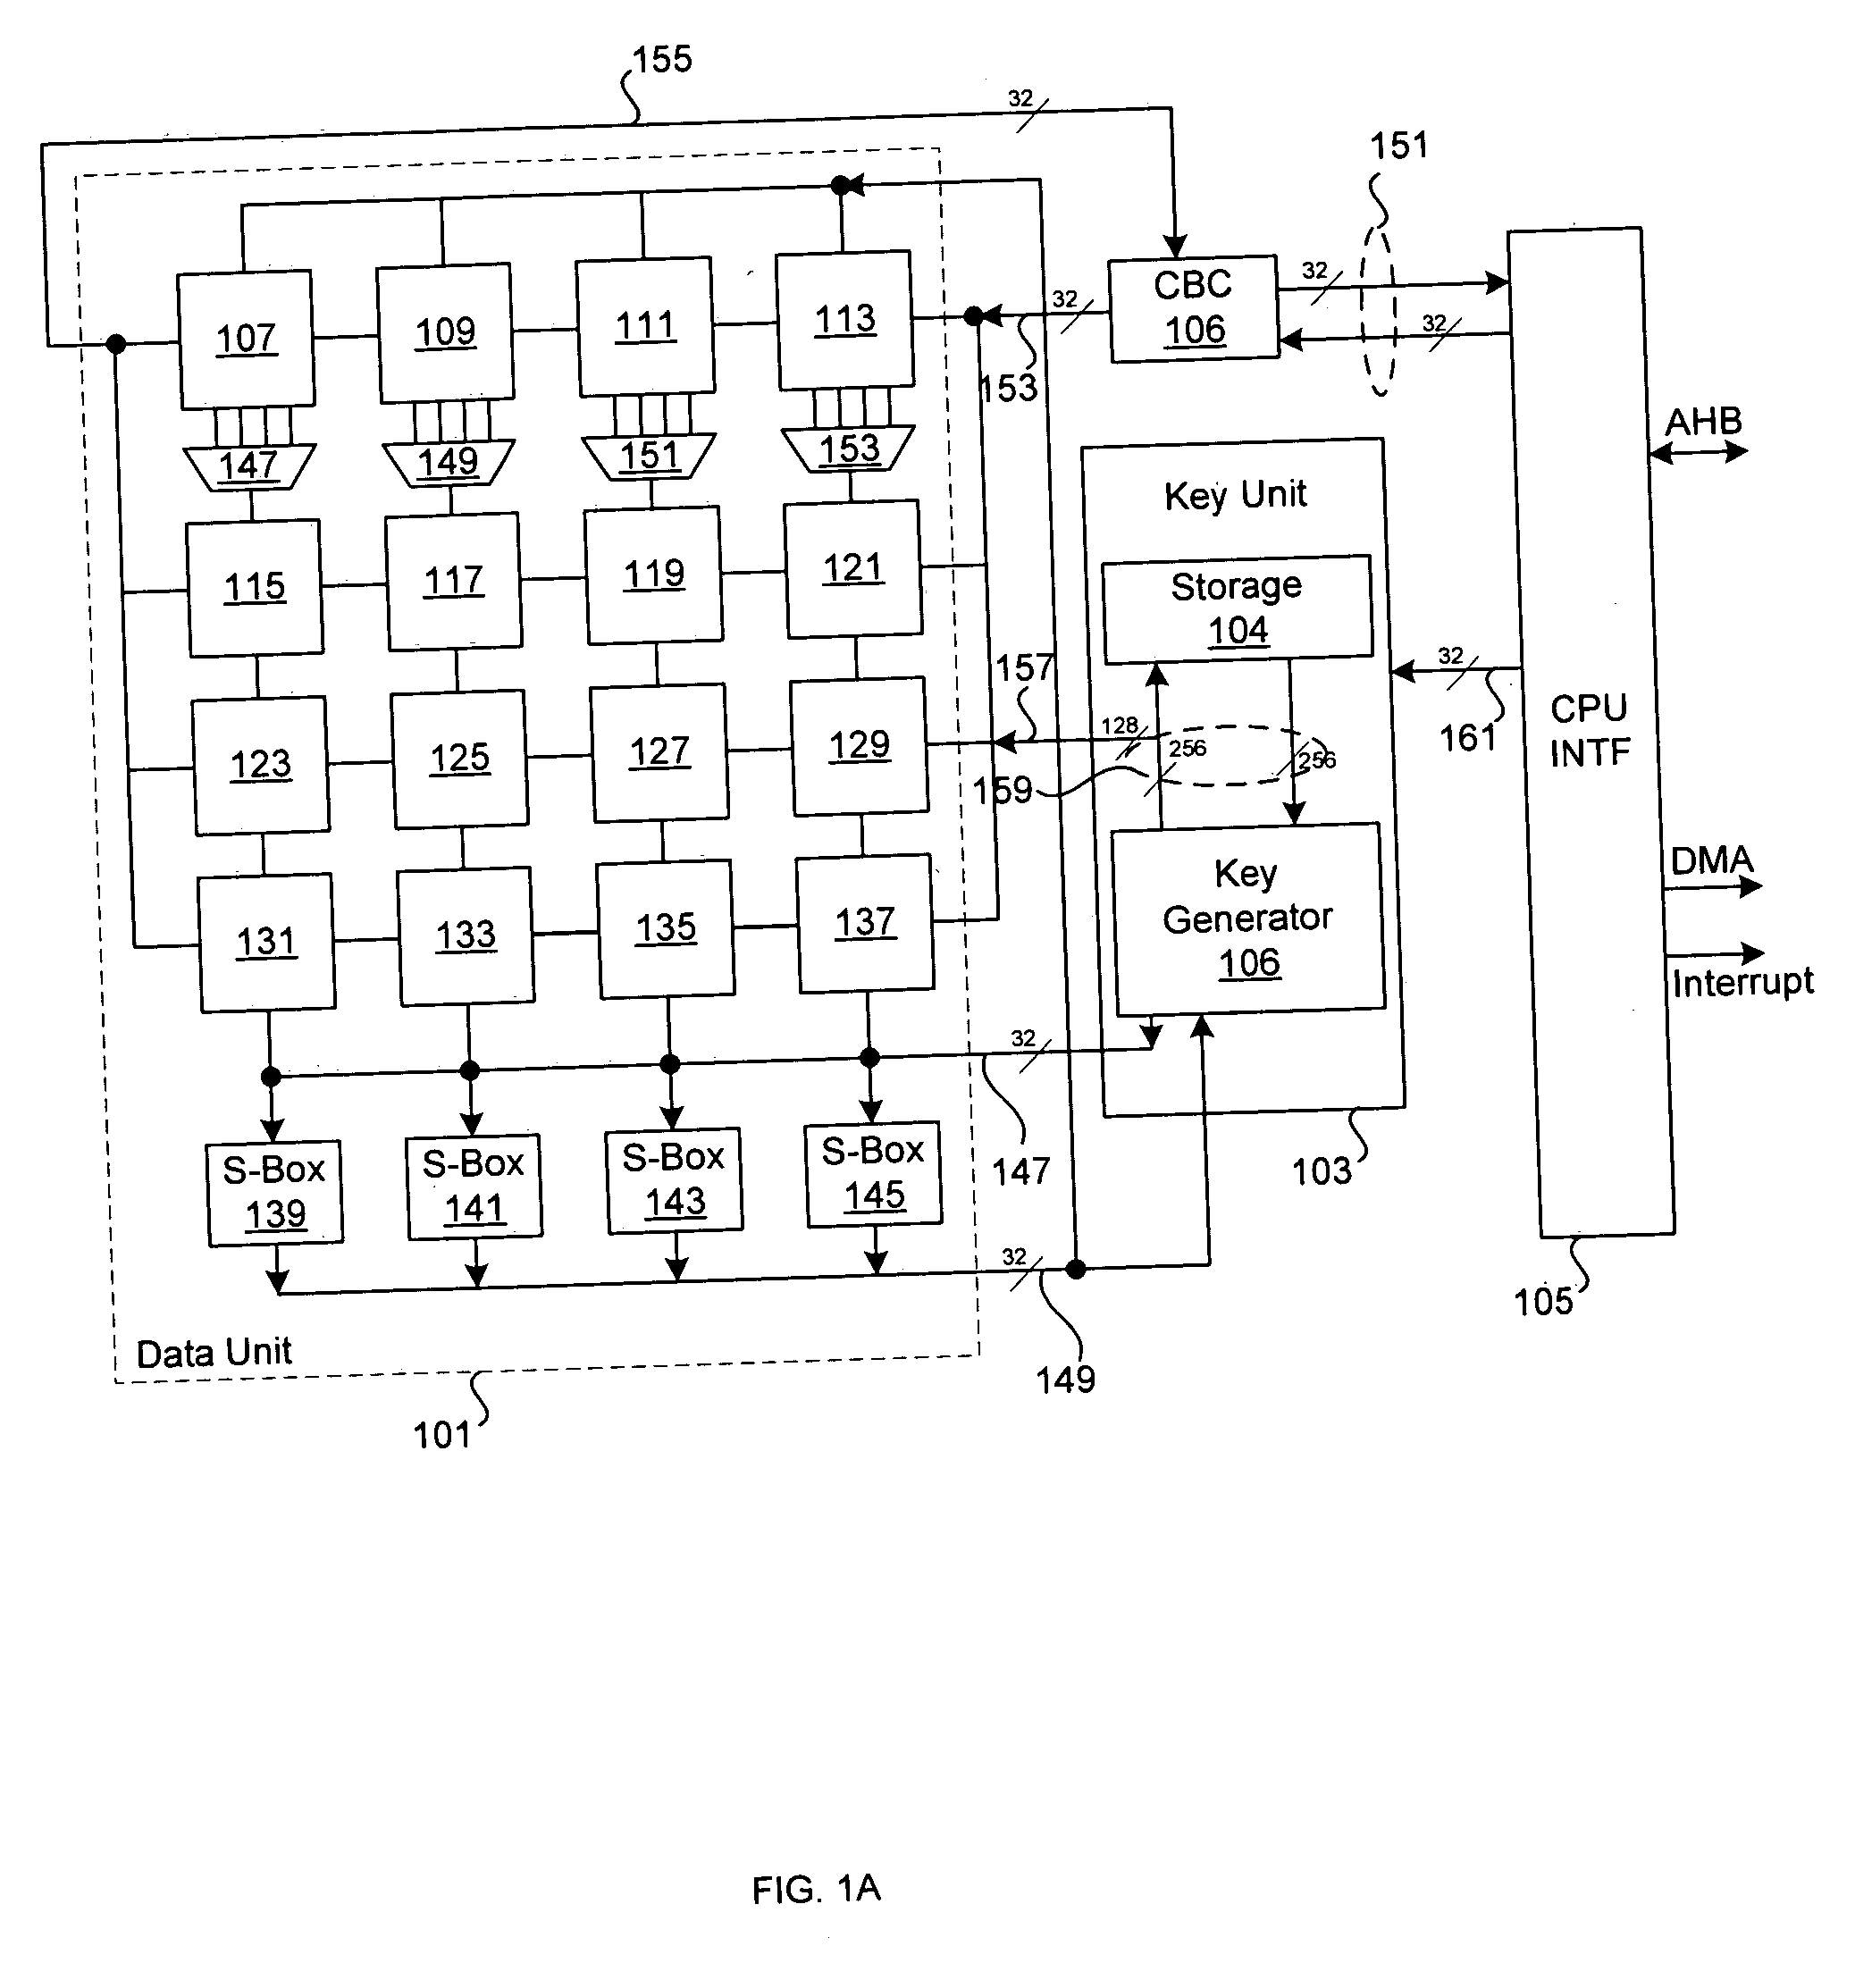 Method and system for implementing substitution boxes (S-boxes) for advanced encryption standard (AES)